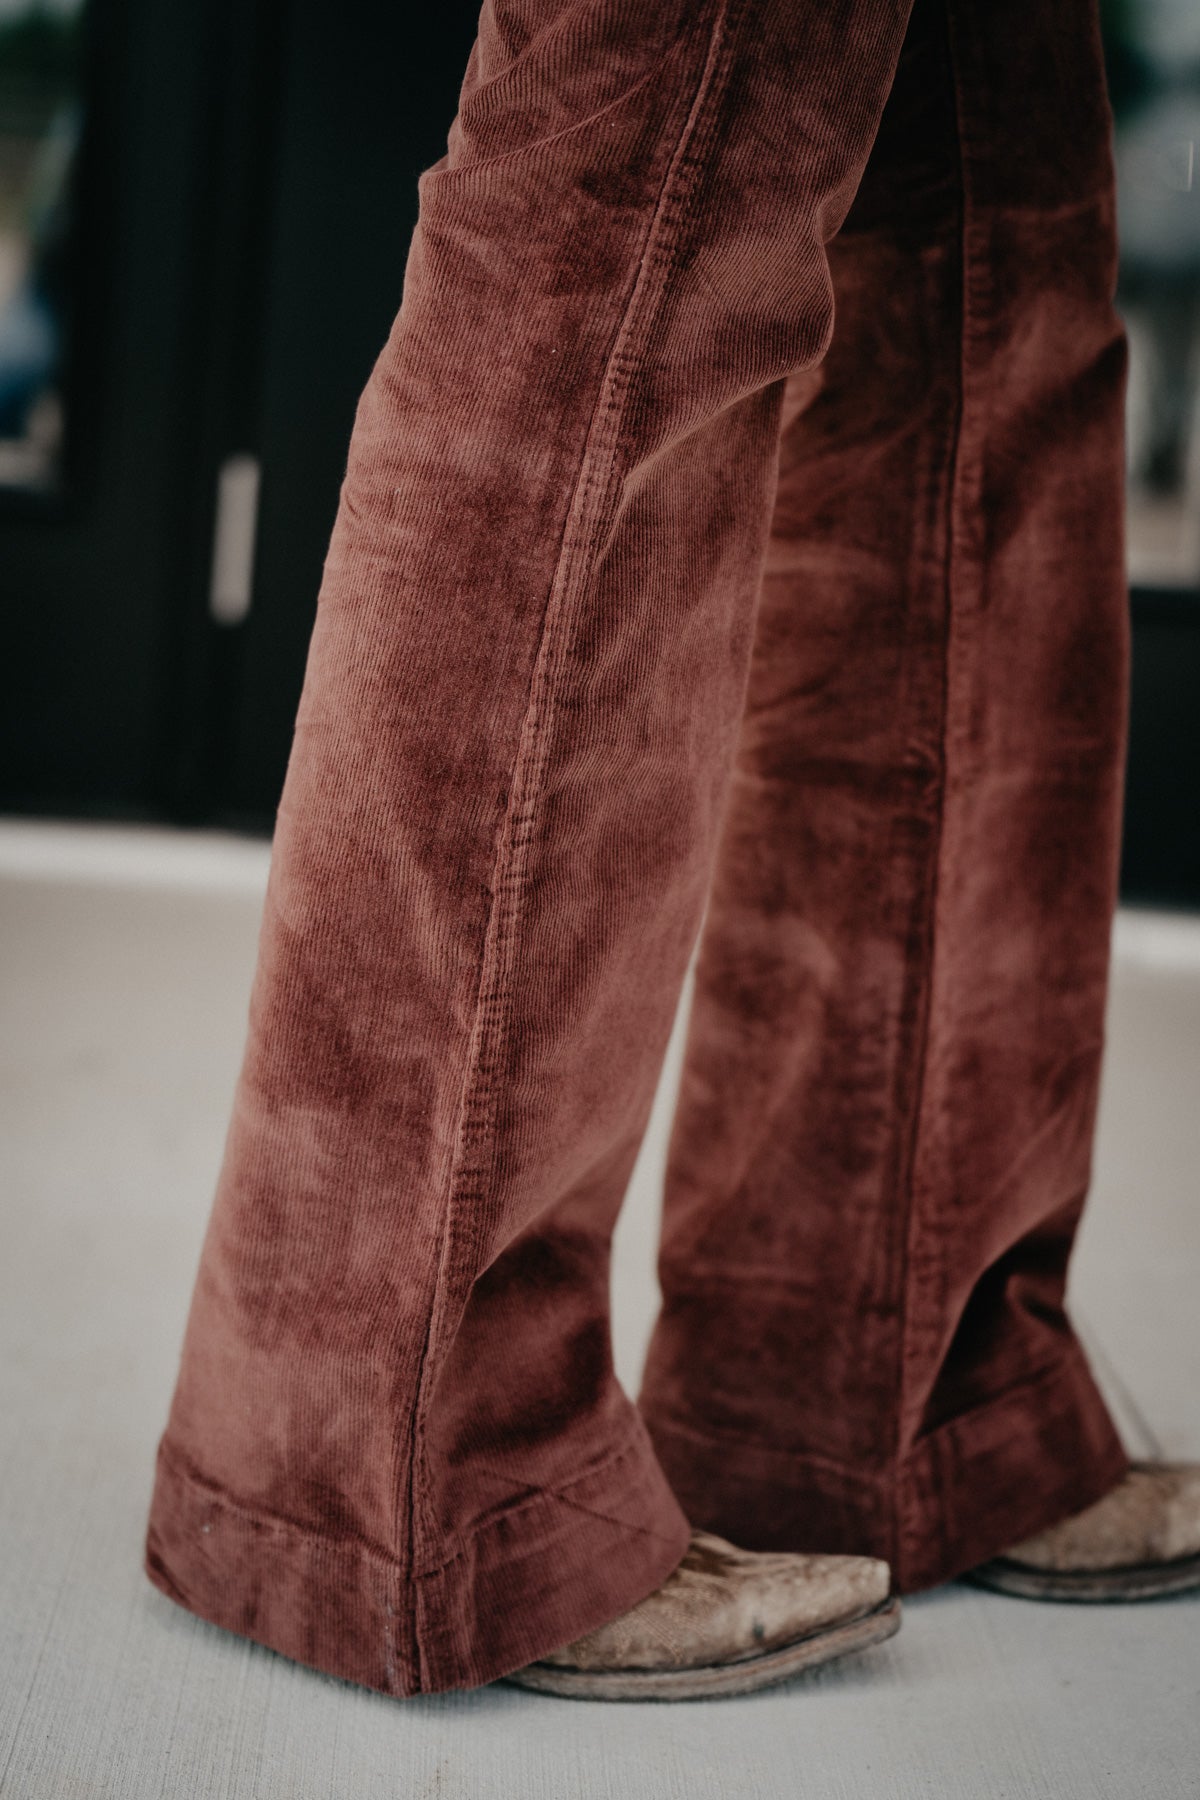 'Wilder Valley' Wrangler Retro High Rise Corduroy Trouser Jean (30/32 and 34/32 Only)